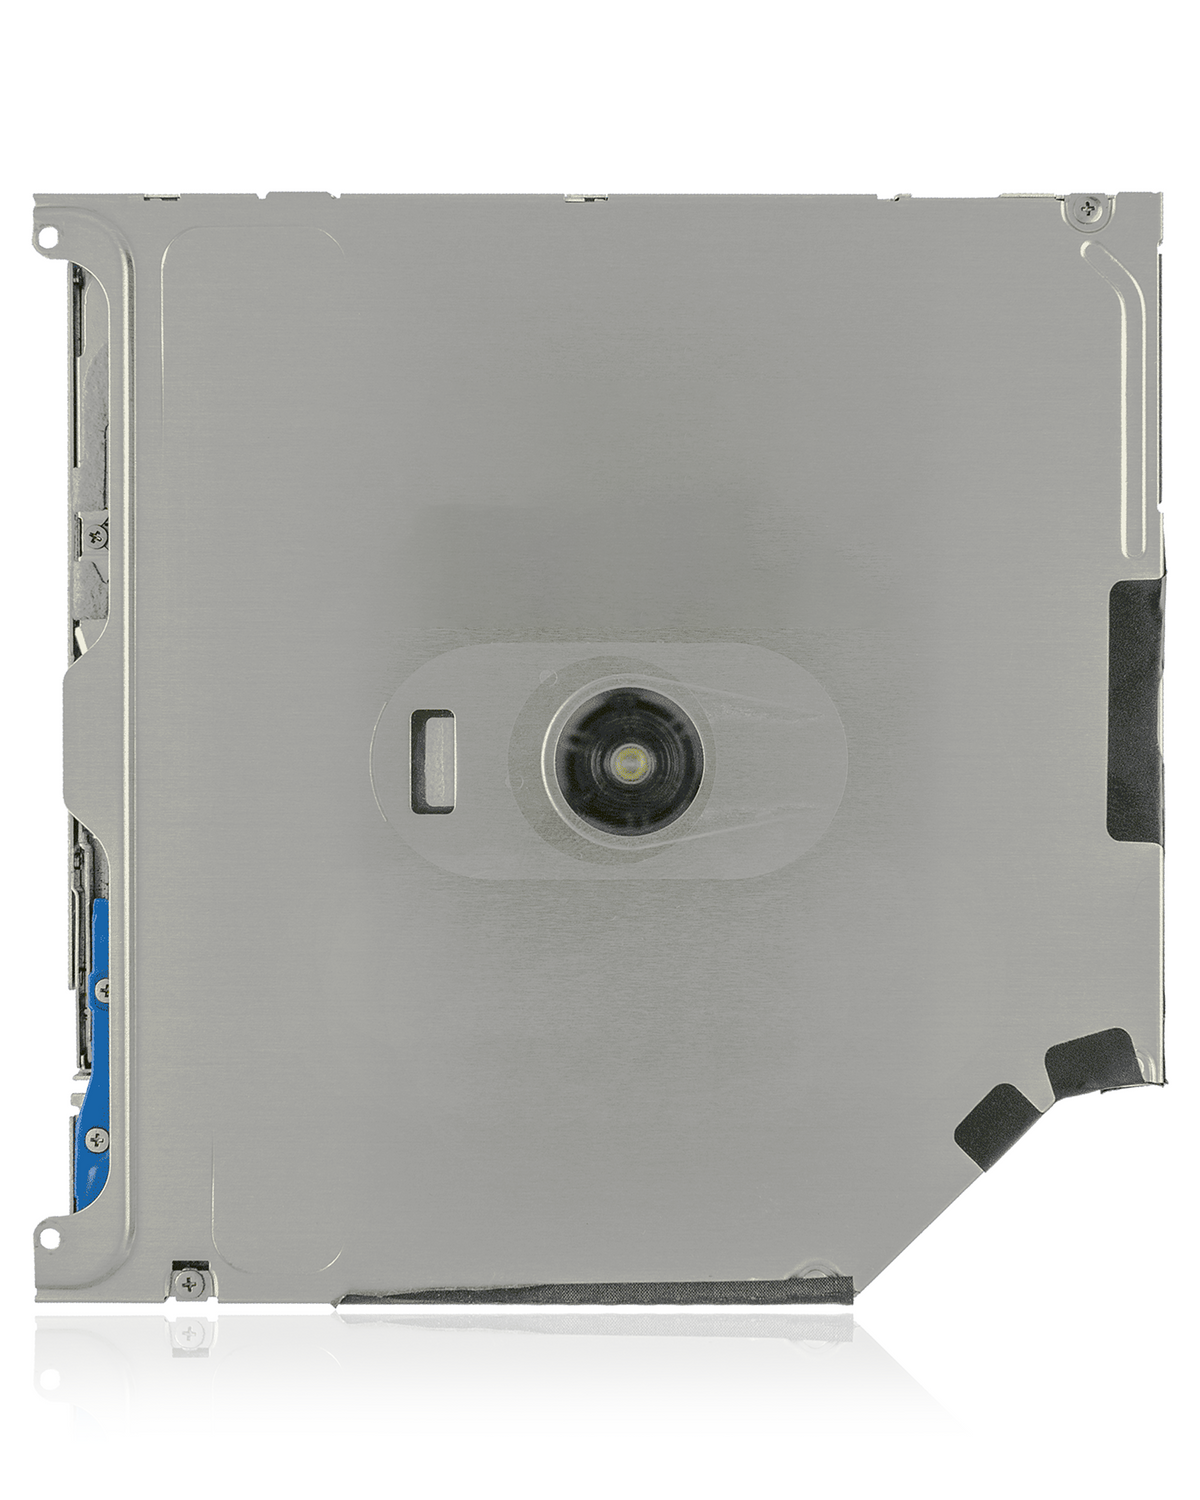 SUPERDRIVE FOR MACBOOK UNIBODY 13" A1278  (LATE 2008) / MACBOOK PRO UNIBODY 17" A1297  (EARLY 2009 / MID 2009)